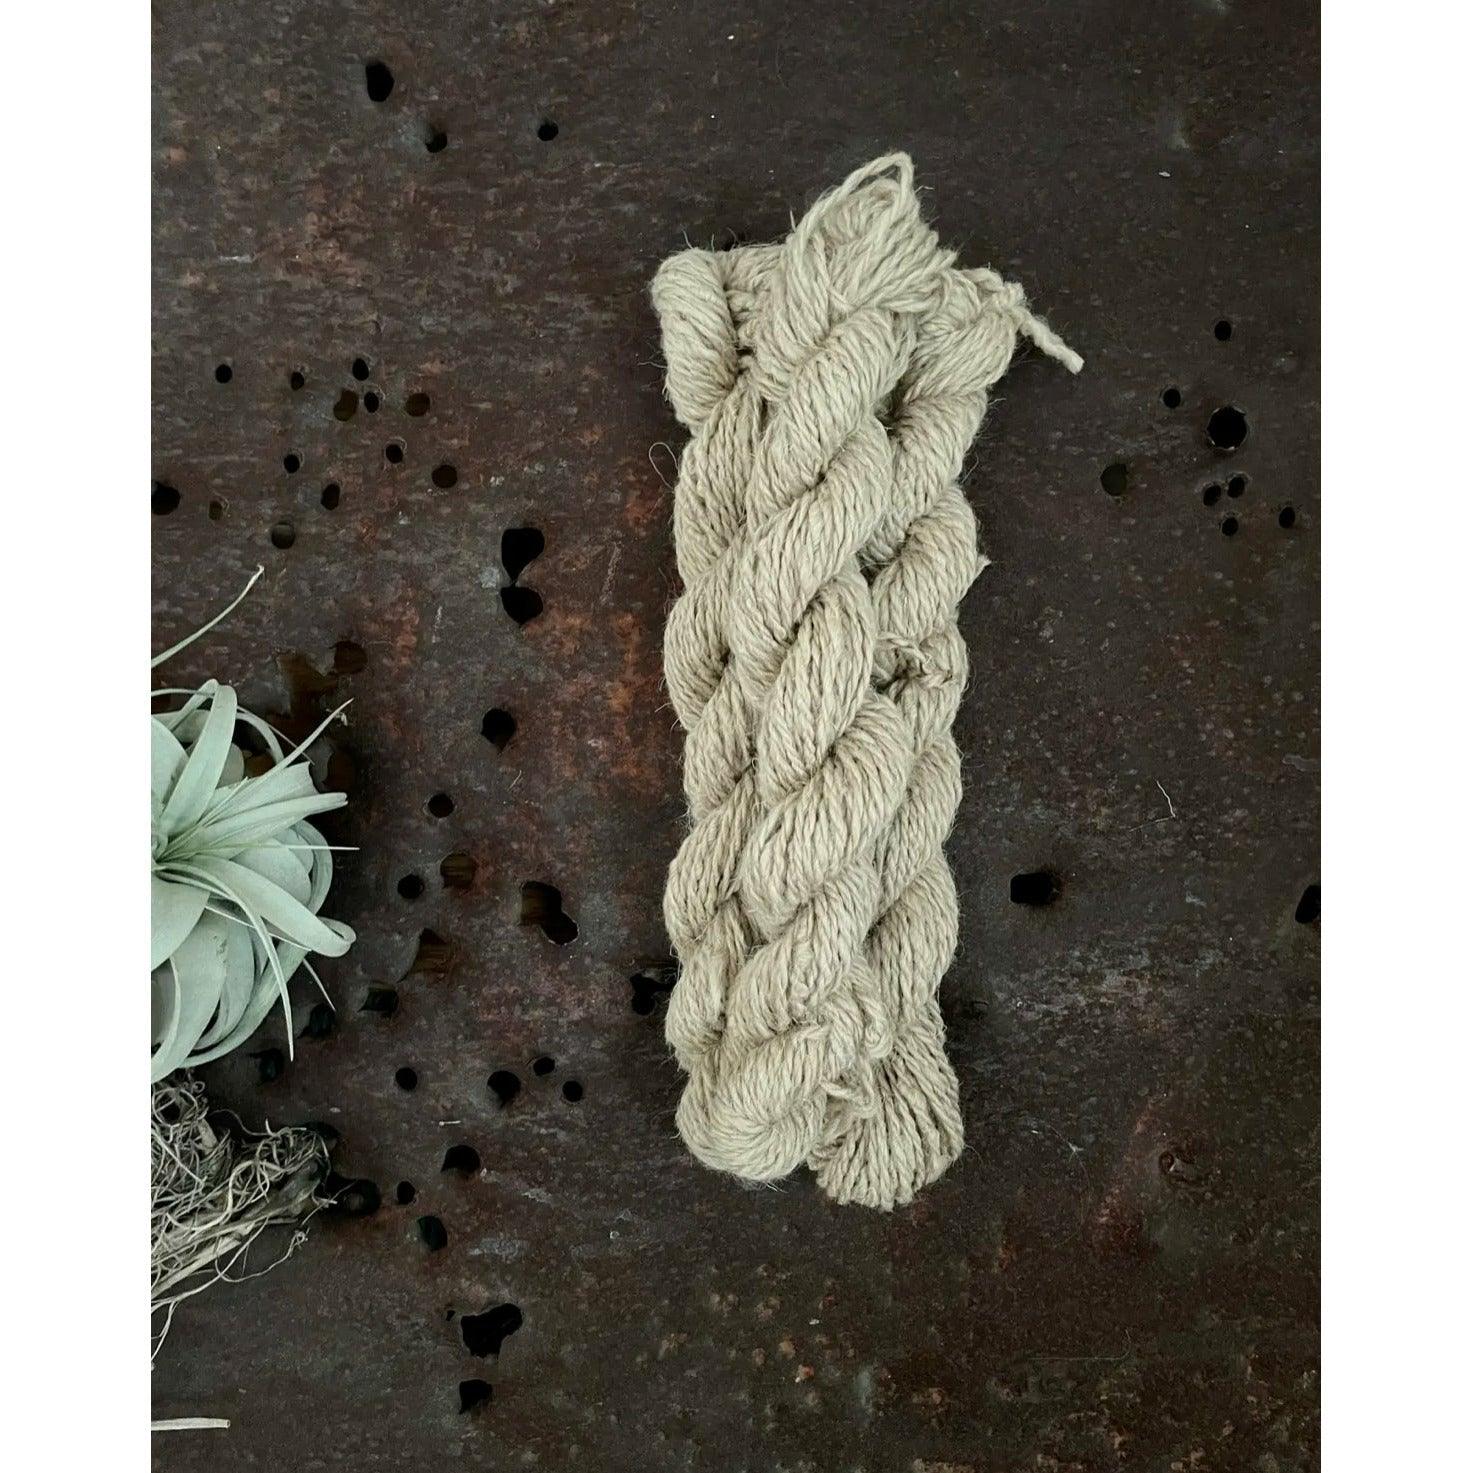 Undyed Yarn  Perfect for Hand-Dyers